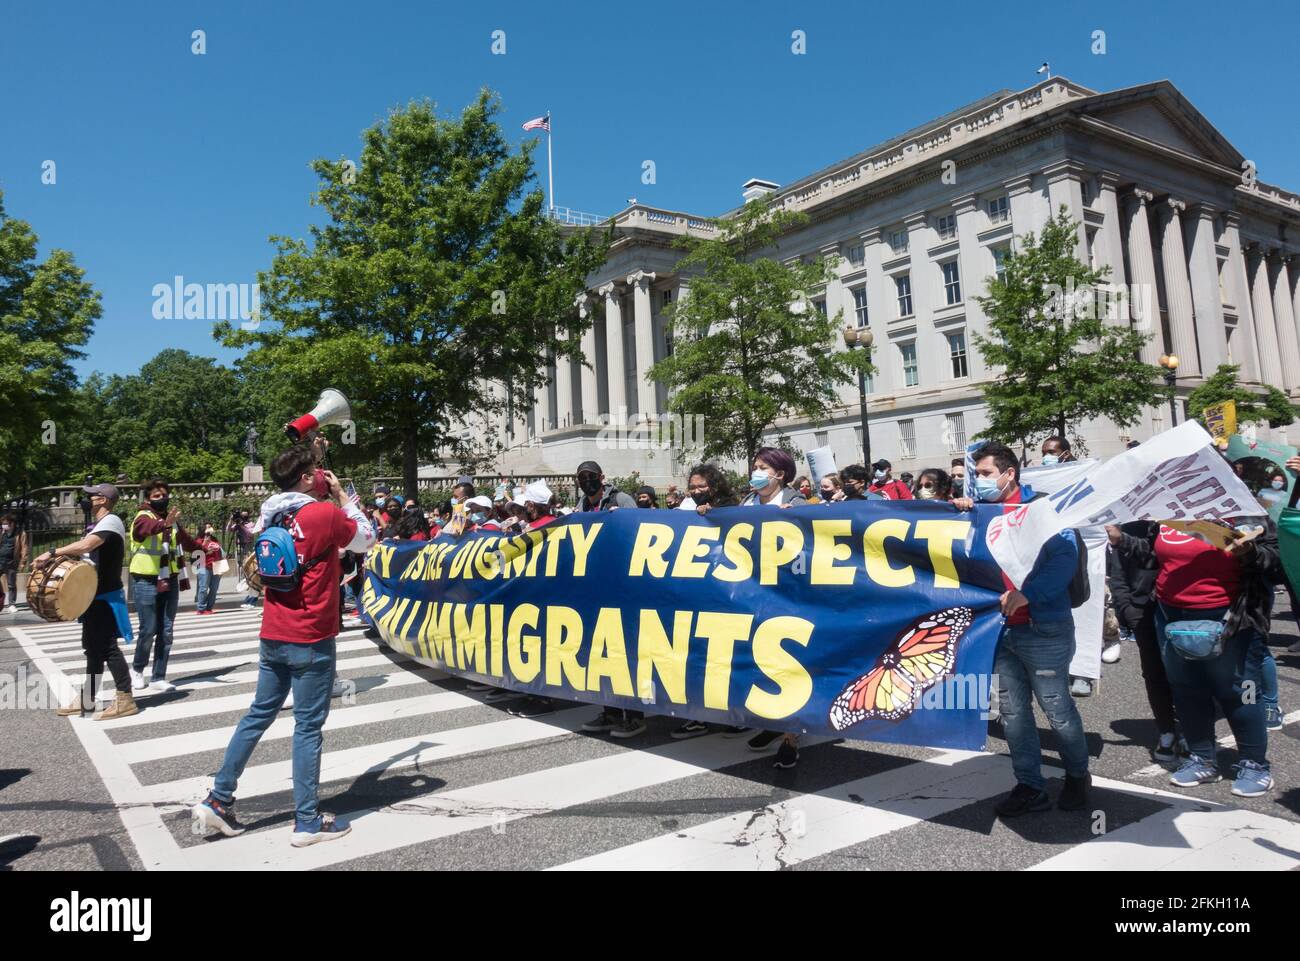 Demonstrators demanding the Biden administration make progress on immigration reform march past the Treasury Department as they head to a rally on the National Mall on May Day, known as International Workers Day.  More than 25 groups participated in the march, which originated at Black Lives Matter Plaza near the White House. May 1, 2021, Washington, DC Stock Photo